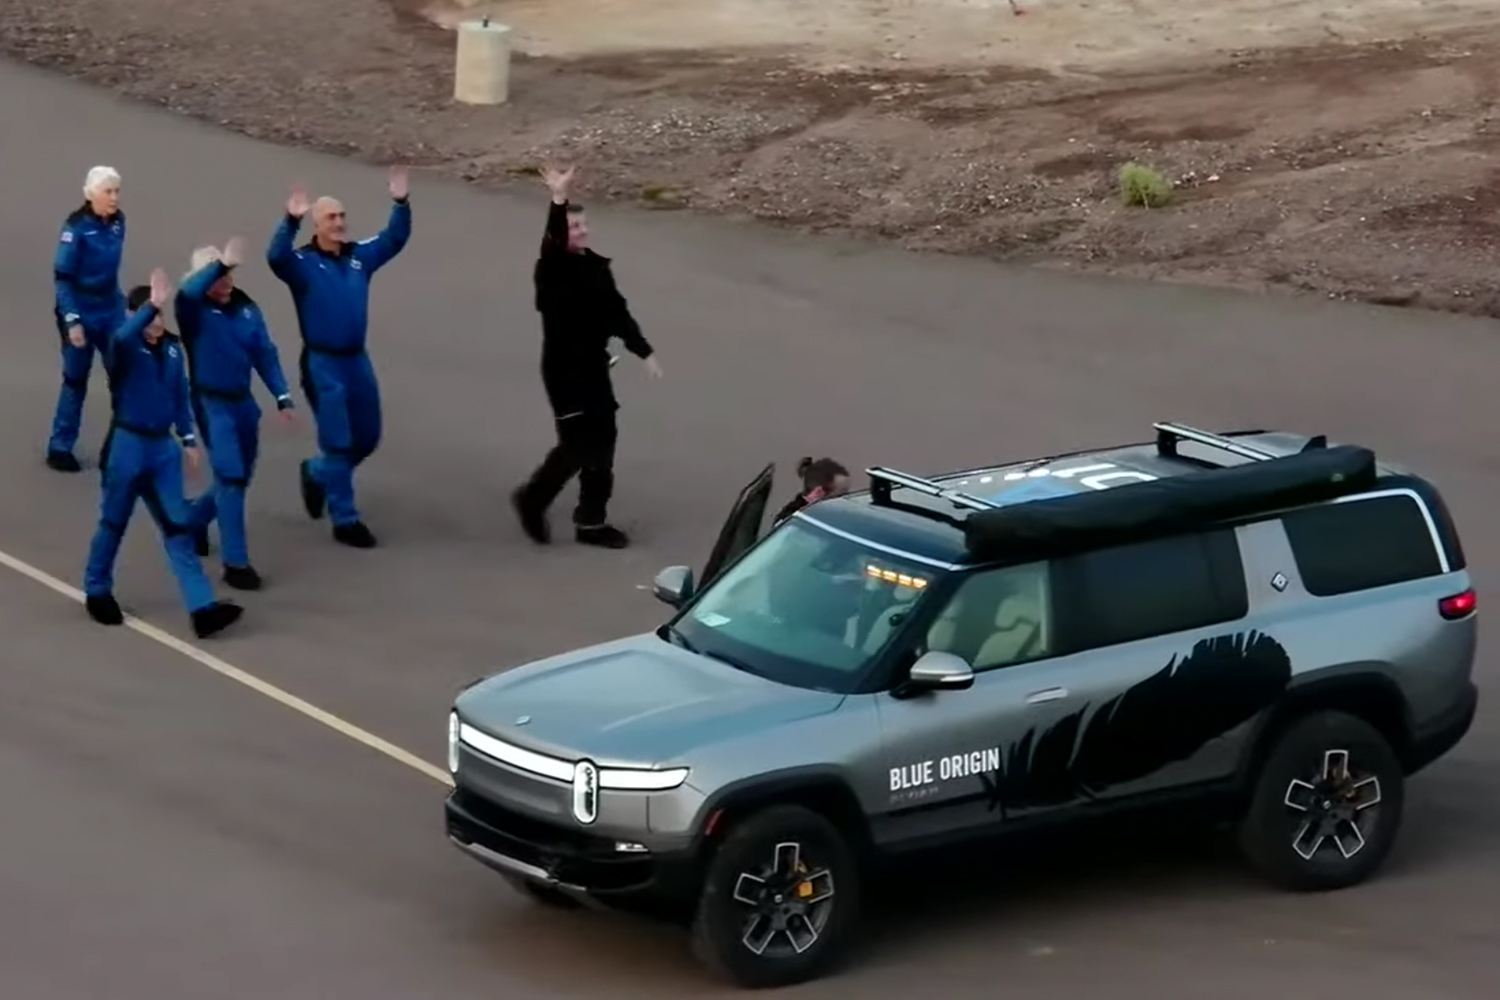 Jeff Bezos, Mark Bezos, Wally Funk and Oliver Daemen waving at the site of the Blue Origin rocket launch next to a Rivian SUV electric adventure vehicle